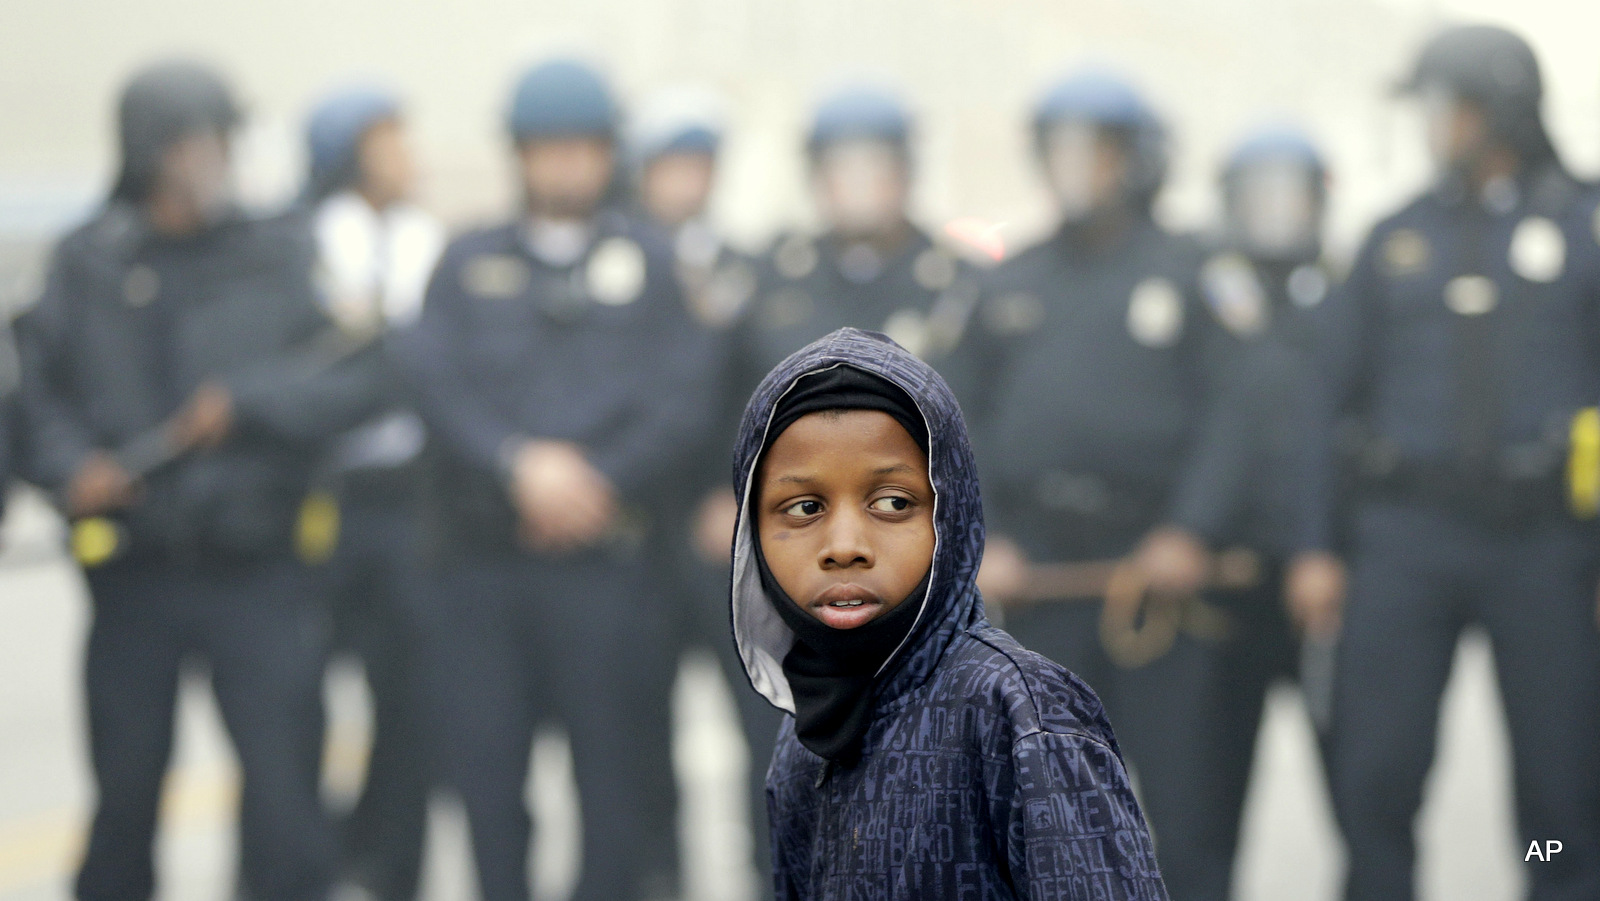 A protestor stands in front of riot Police Monday, April 27, 2015, following the funeral of Freddie Gray in Baltimore. 